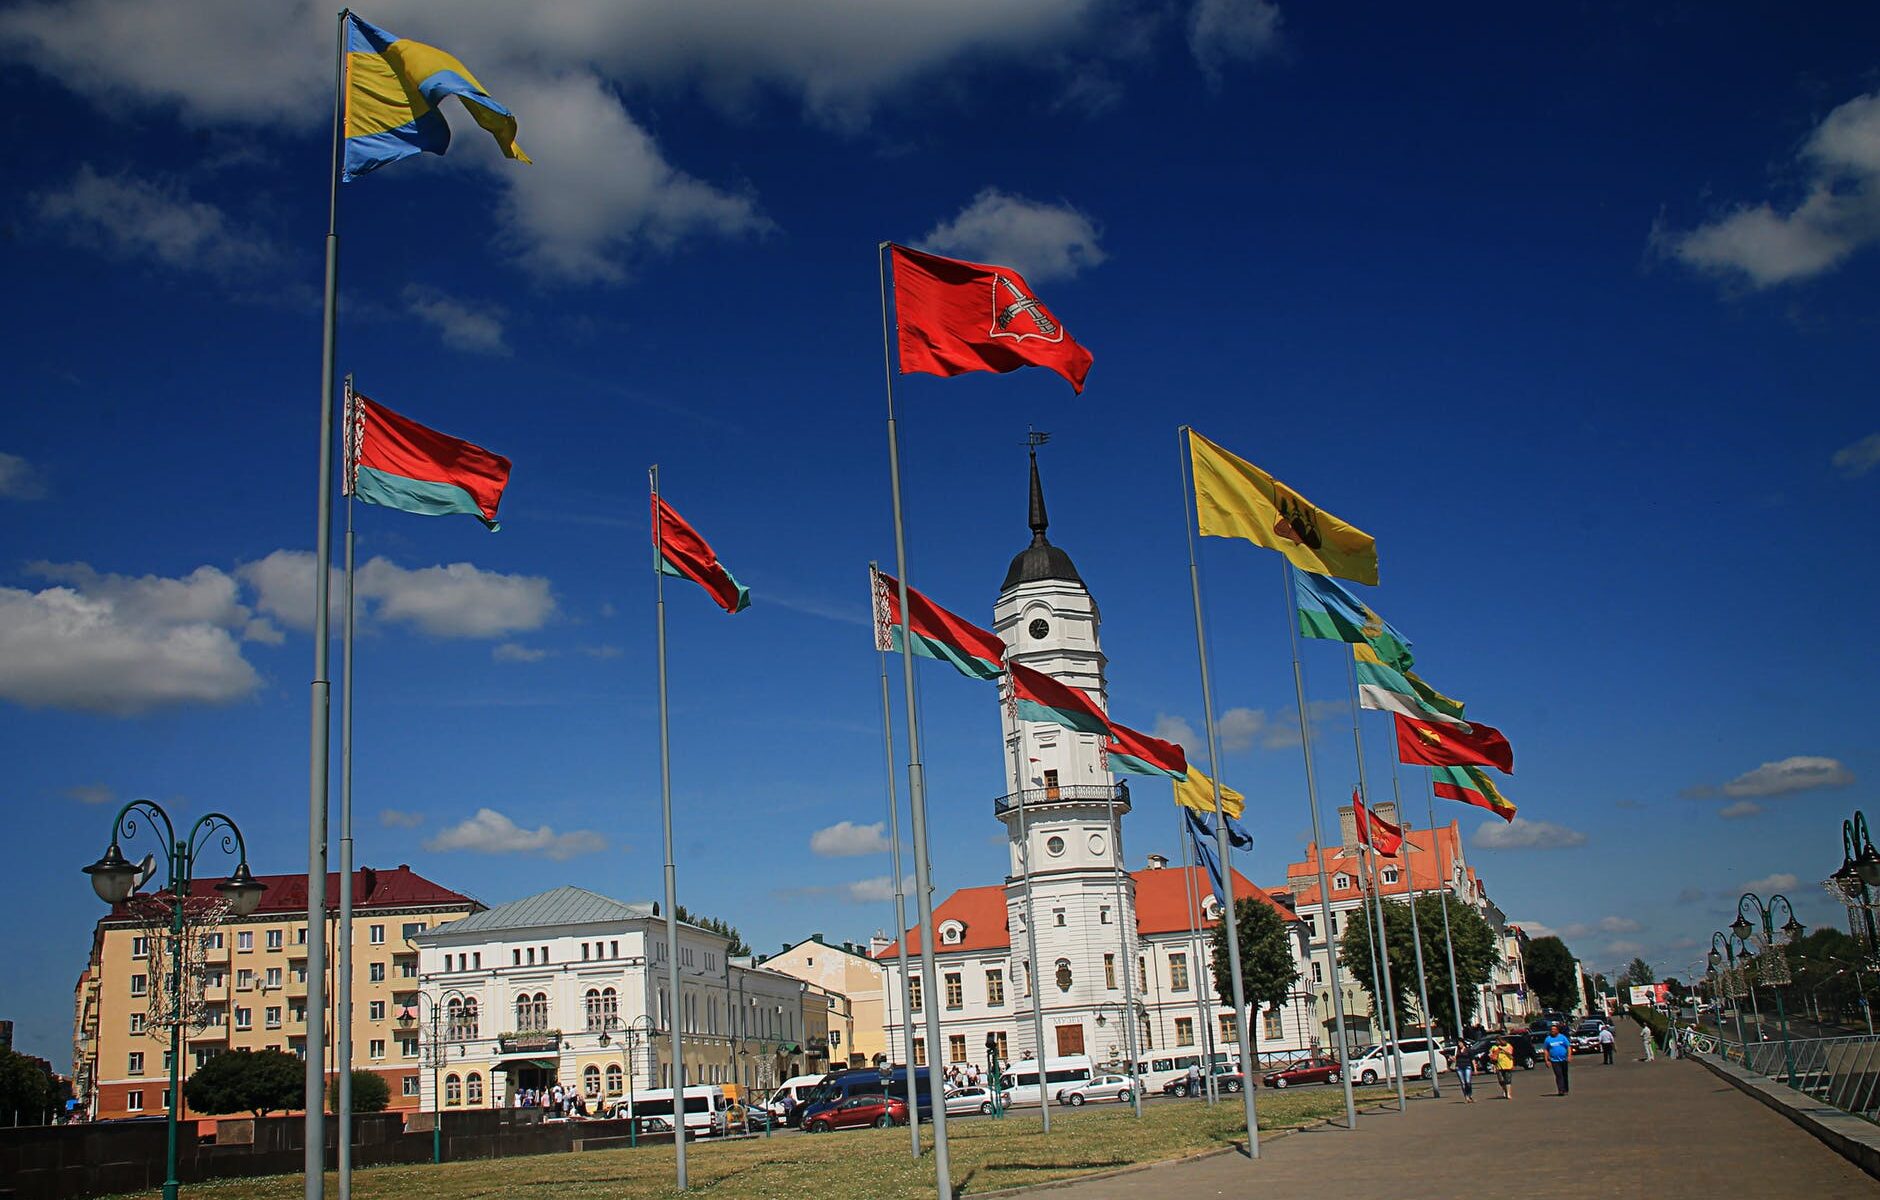 different flags waving on poles at daytime